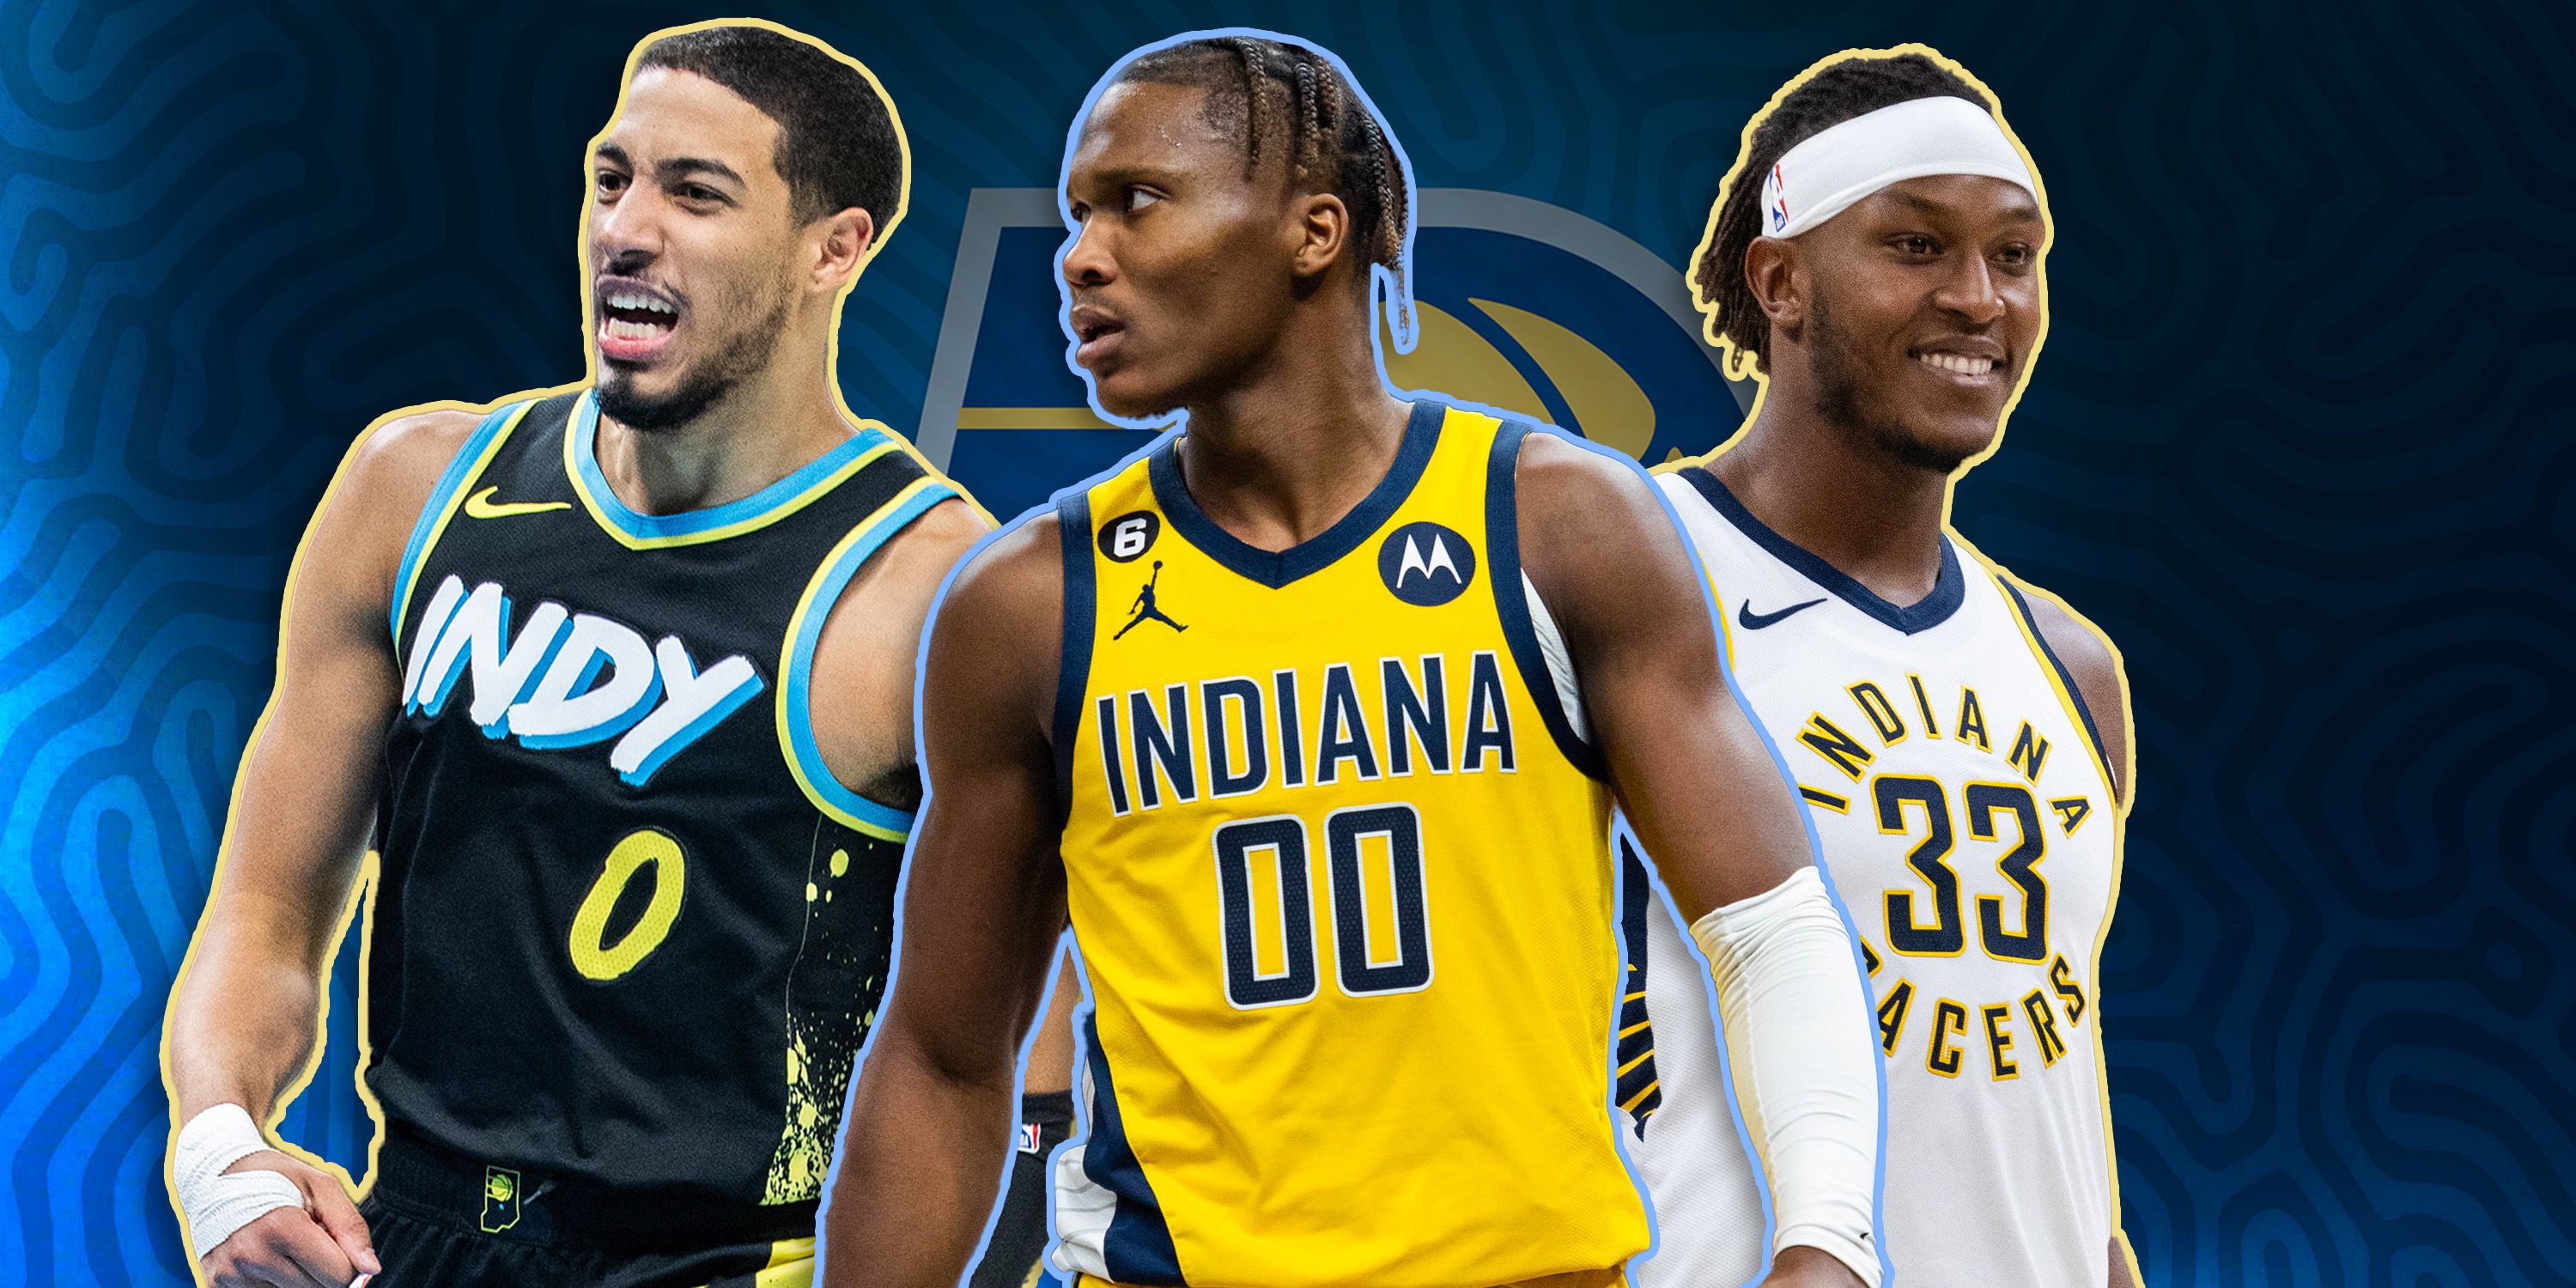 NBA_Indiana Pacers